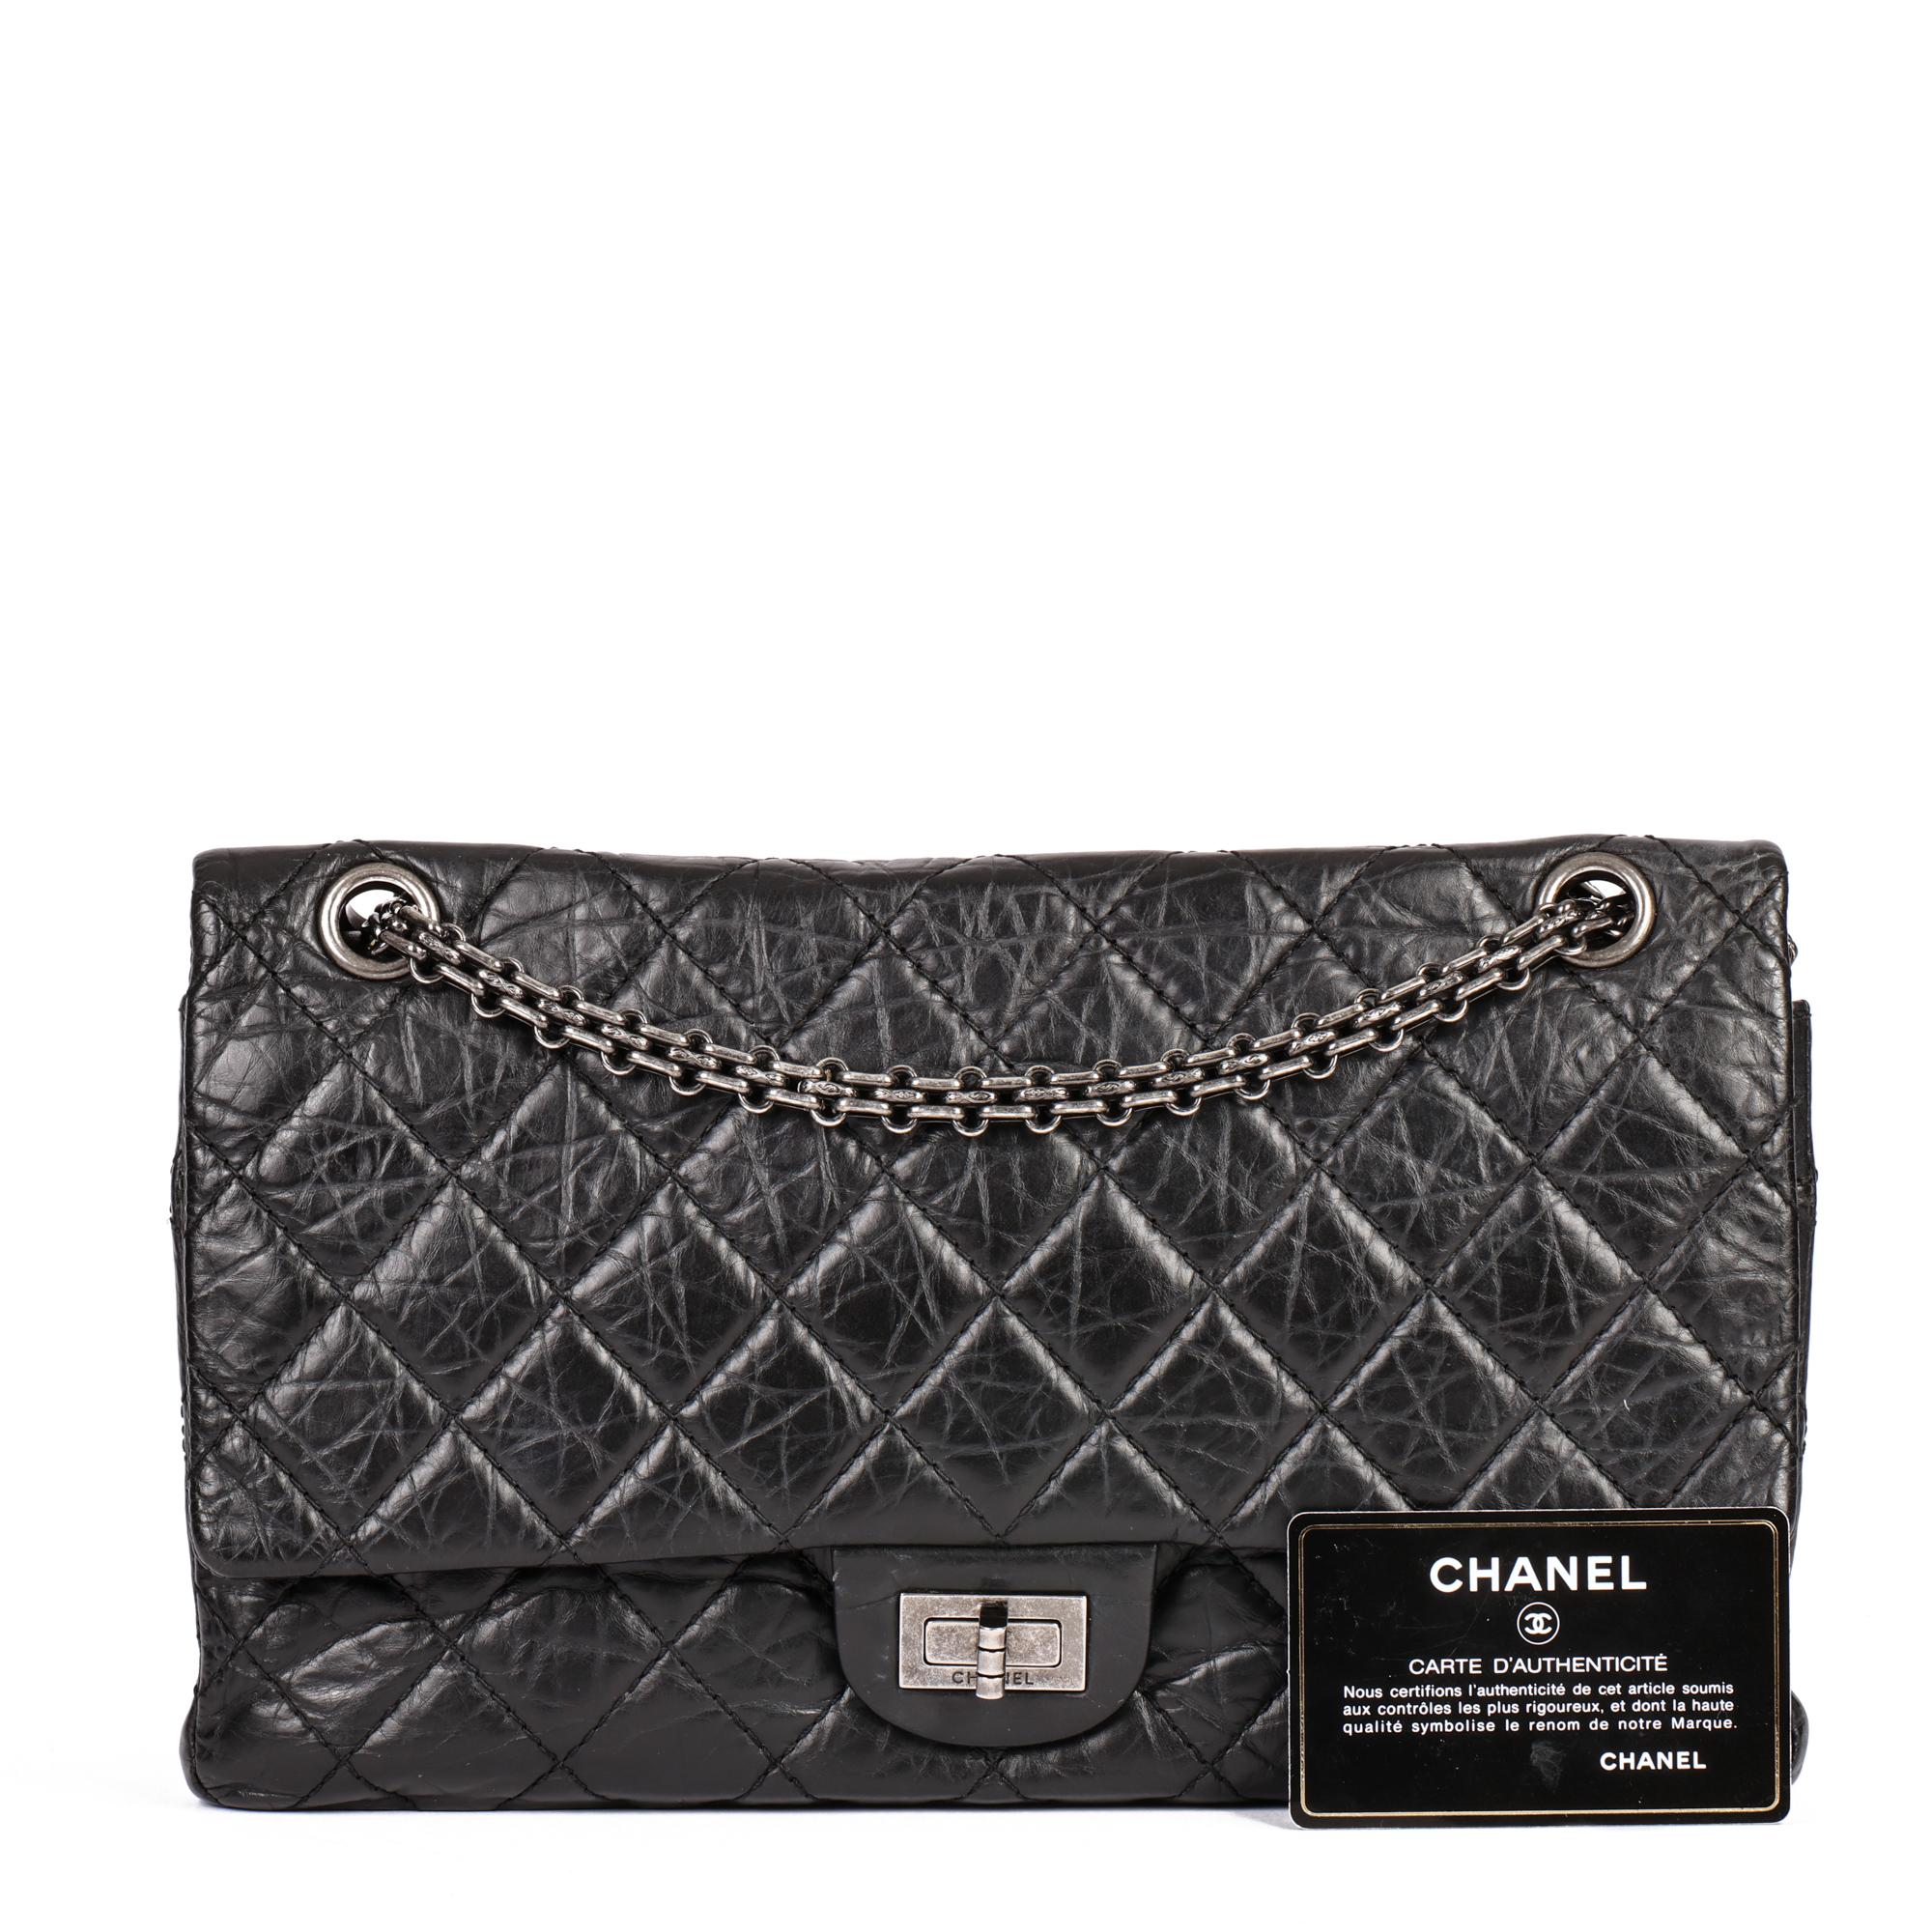 CHANEL Black Aged Calfskin Leather 226 2.55 Reissue Double Flap Bag 8